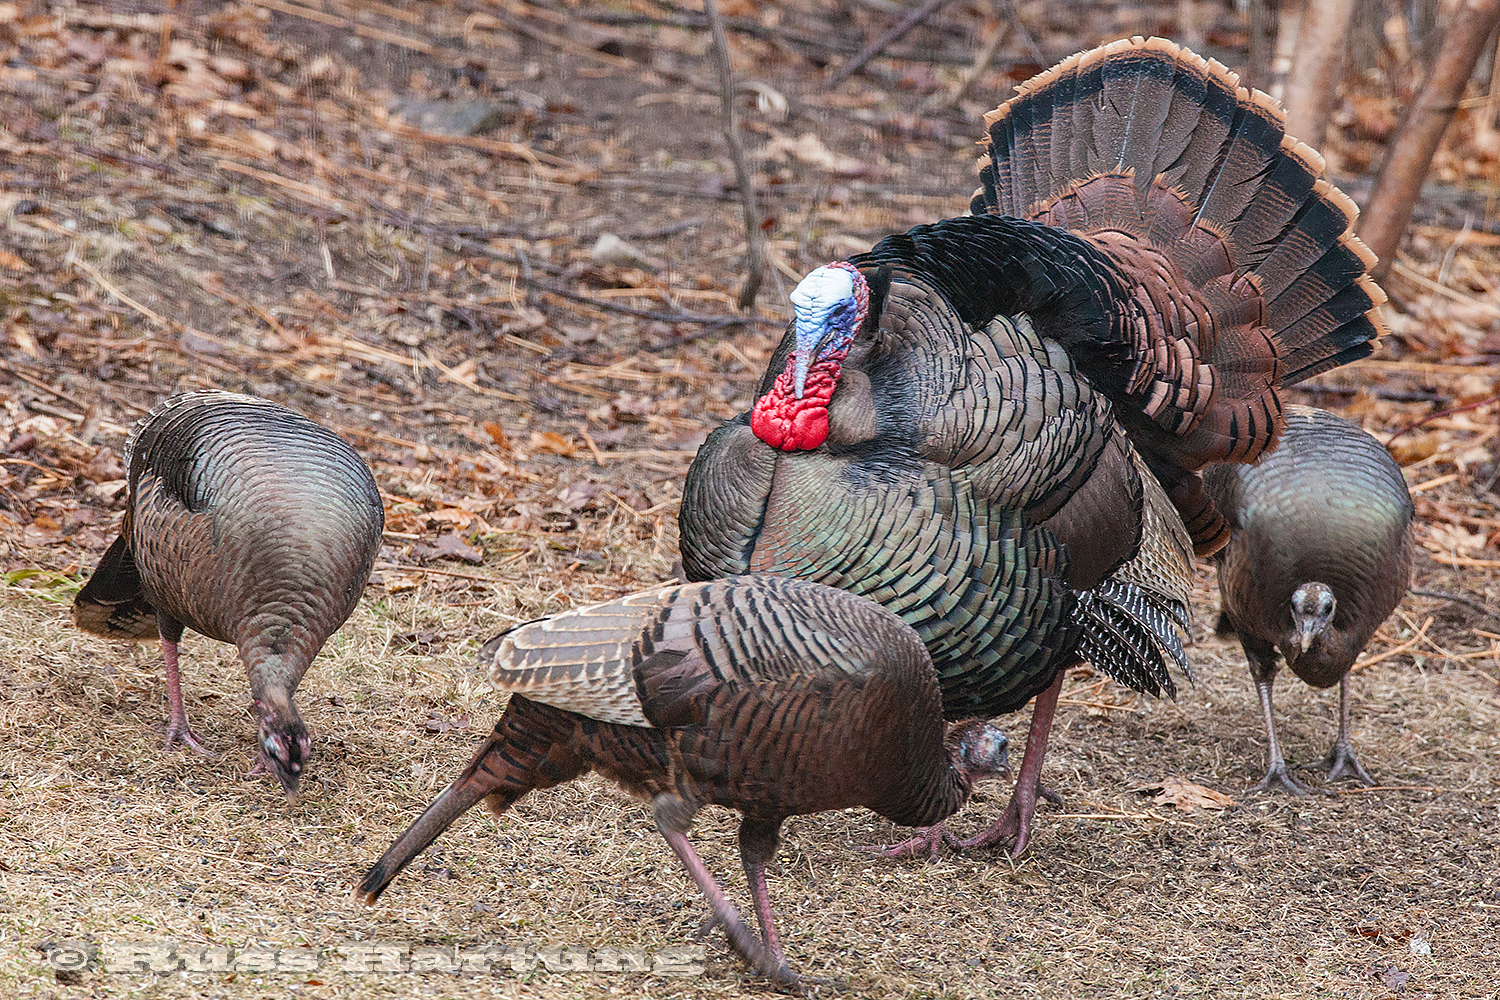 A male turkey trying hard to impress the ladies but doesn't seem to be getting much attention. 